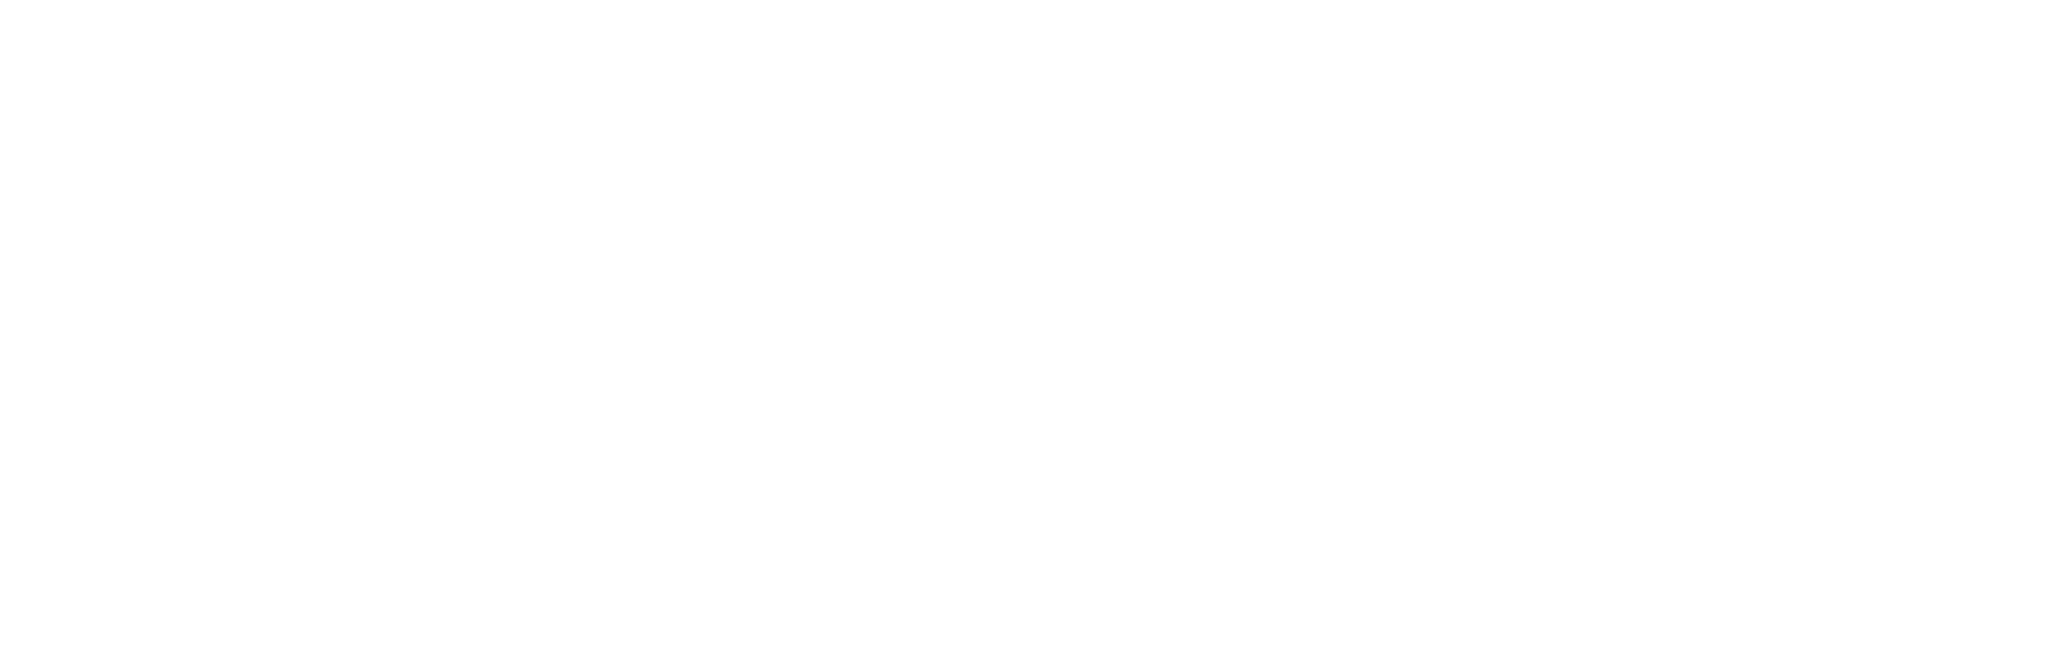 Clarity Ministries | Mark Neal